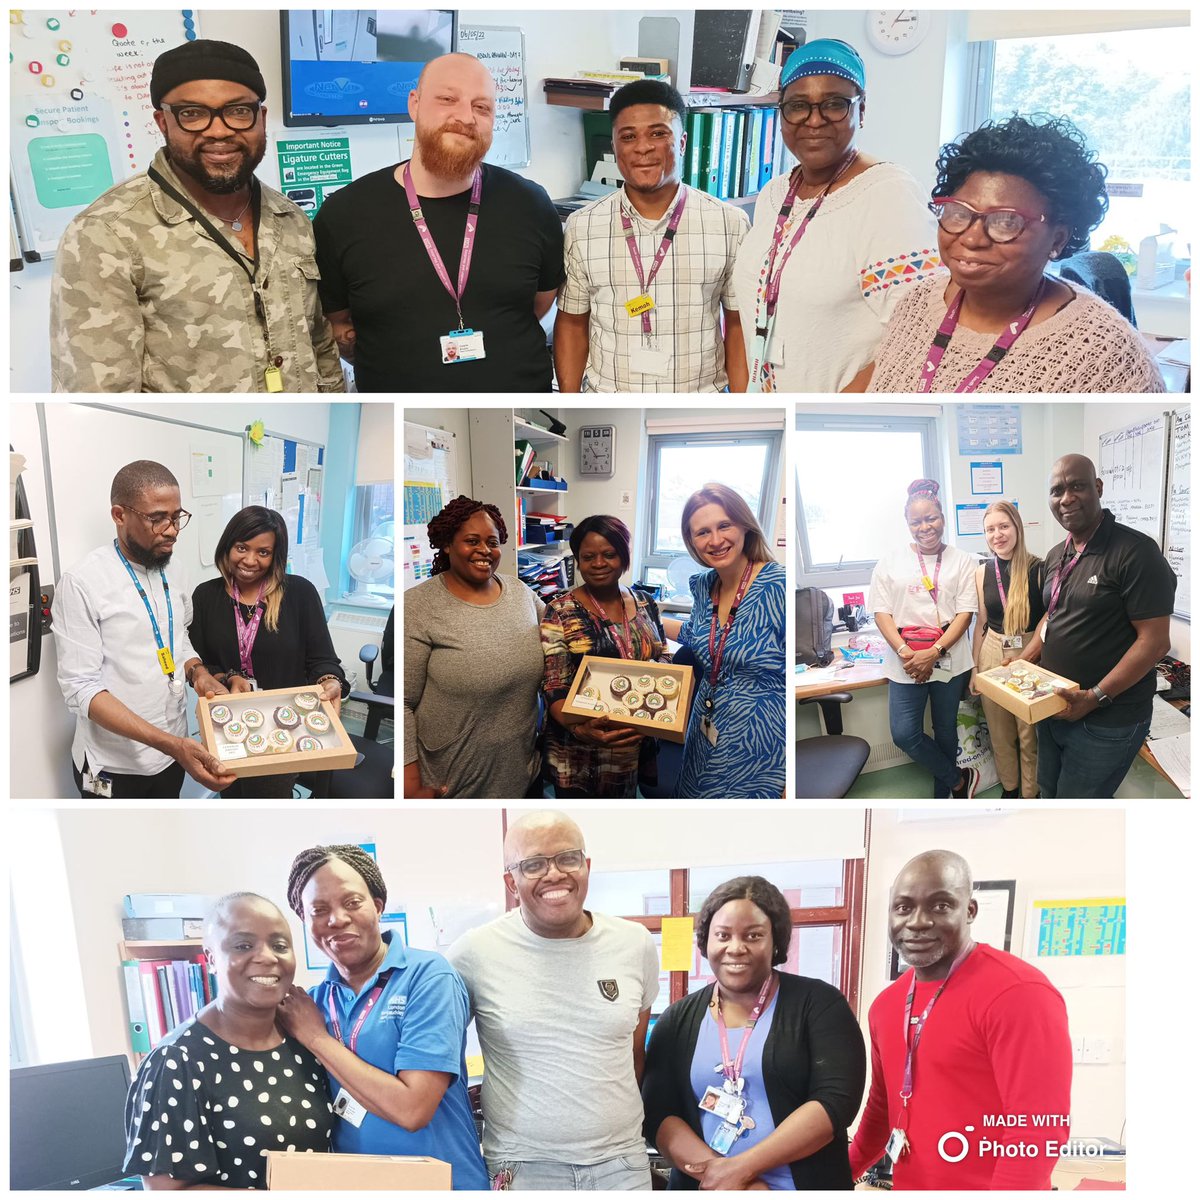 A huge thank you to all of our wonderful nurses in Lewisham directorate! Your hard work, care and compassion makes such a difference to our service users lives. You are appreciated! @MaudsleyNHS @MaudsleyDoN @HelenKelsall3 #nursesweek2022 #slamnurses #thankyou #nursesrock